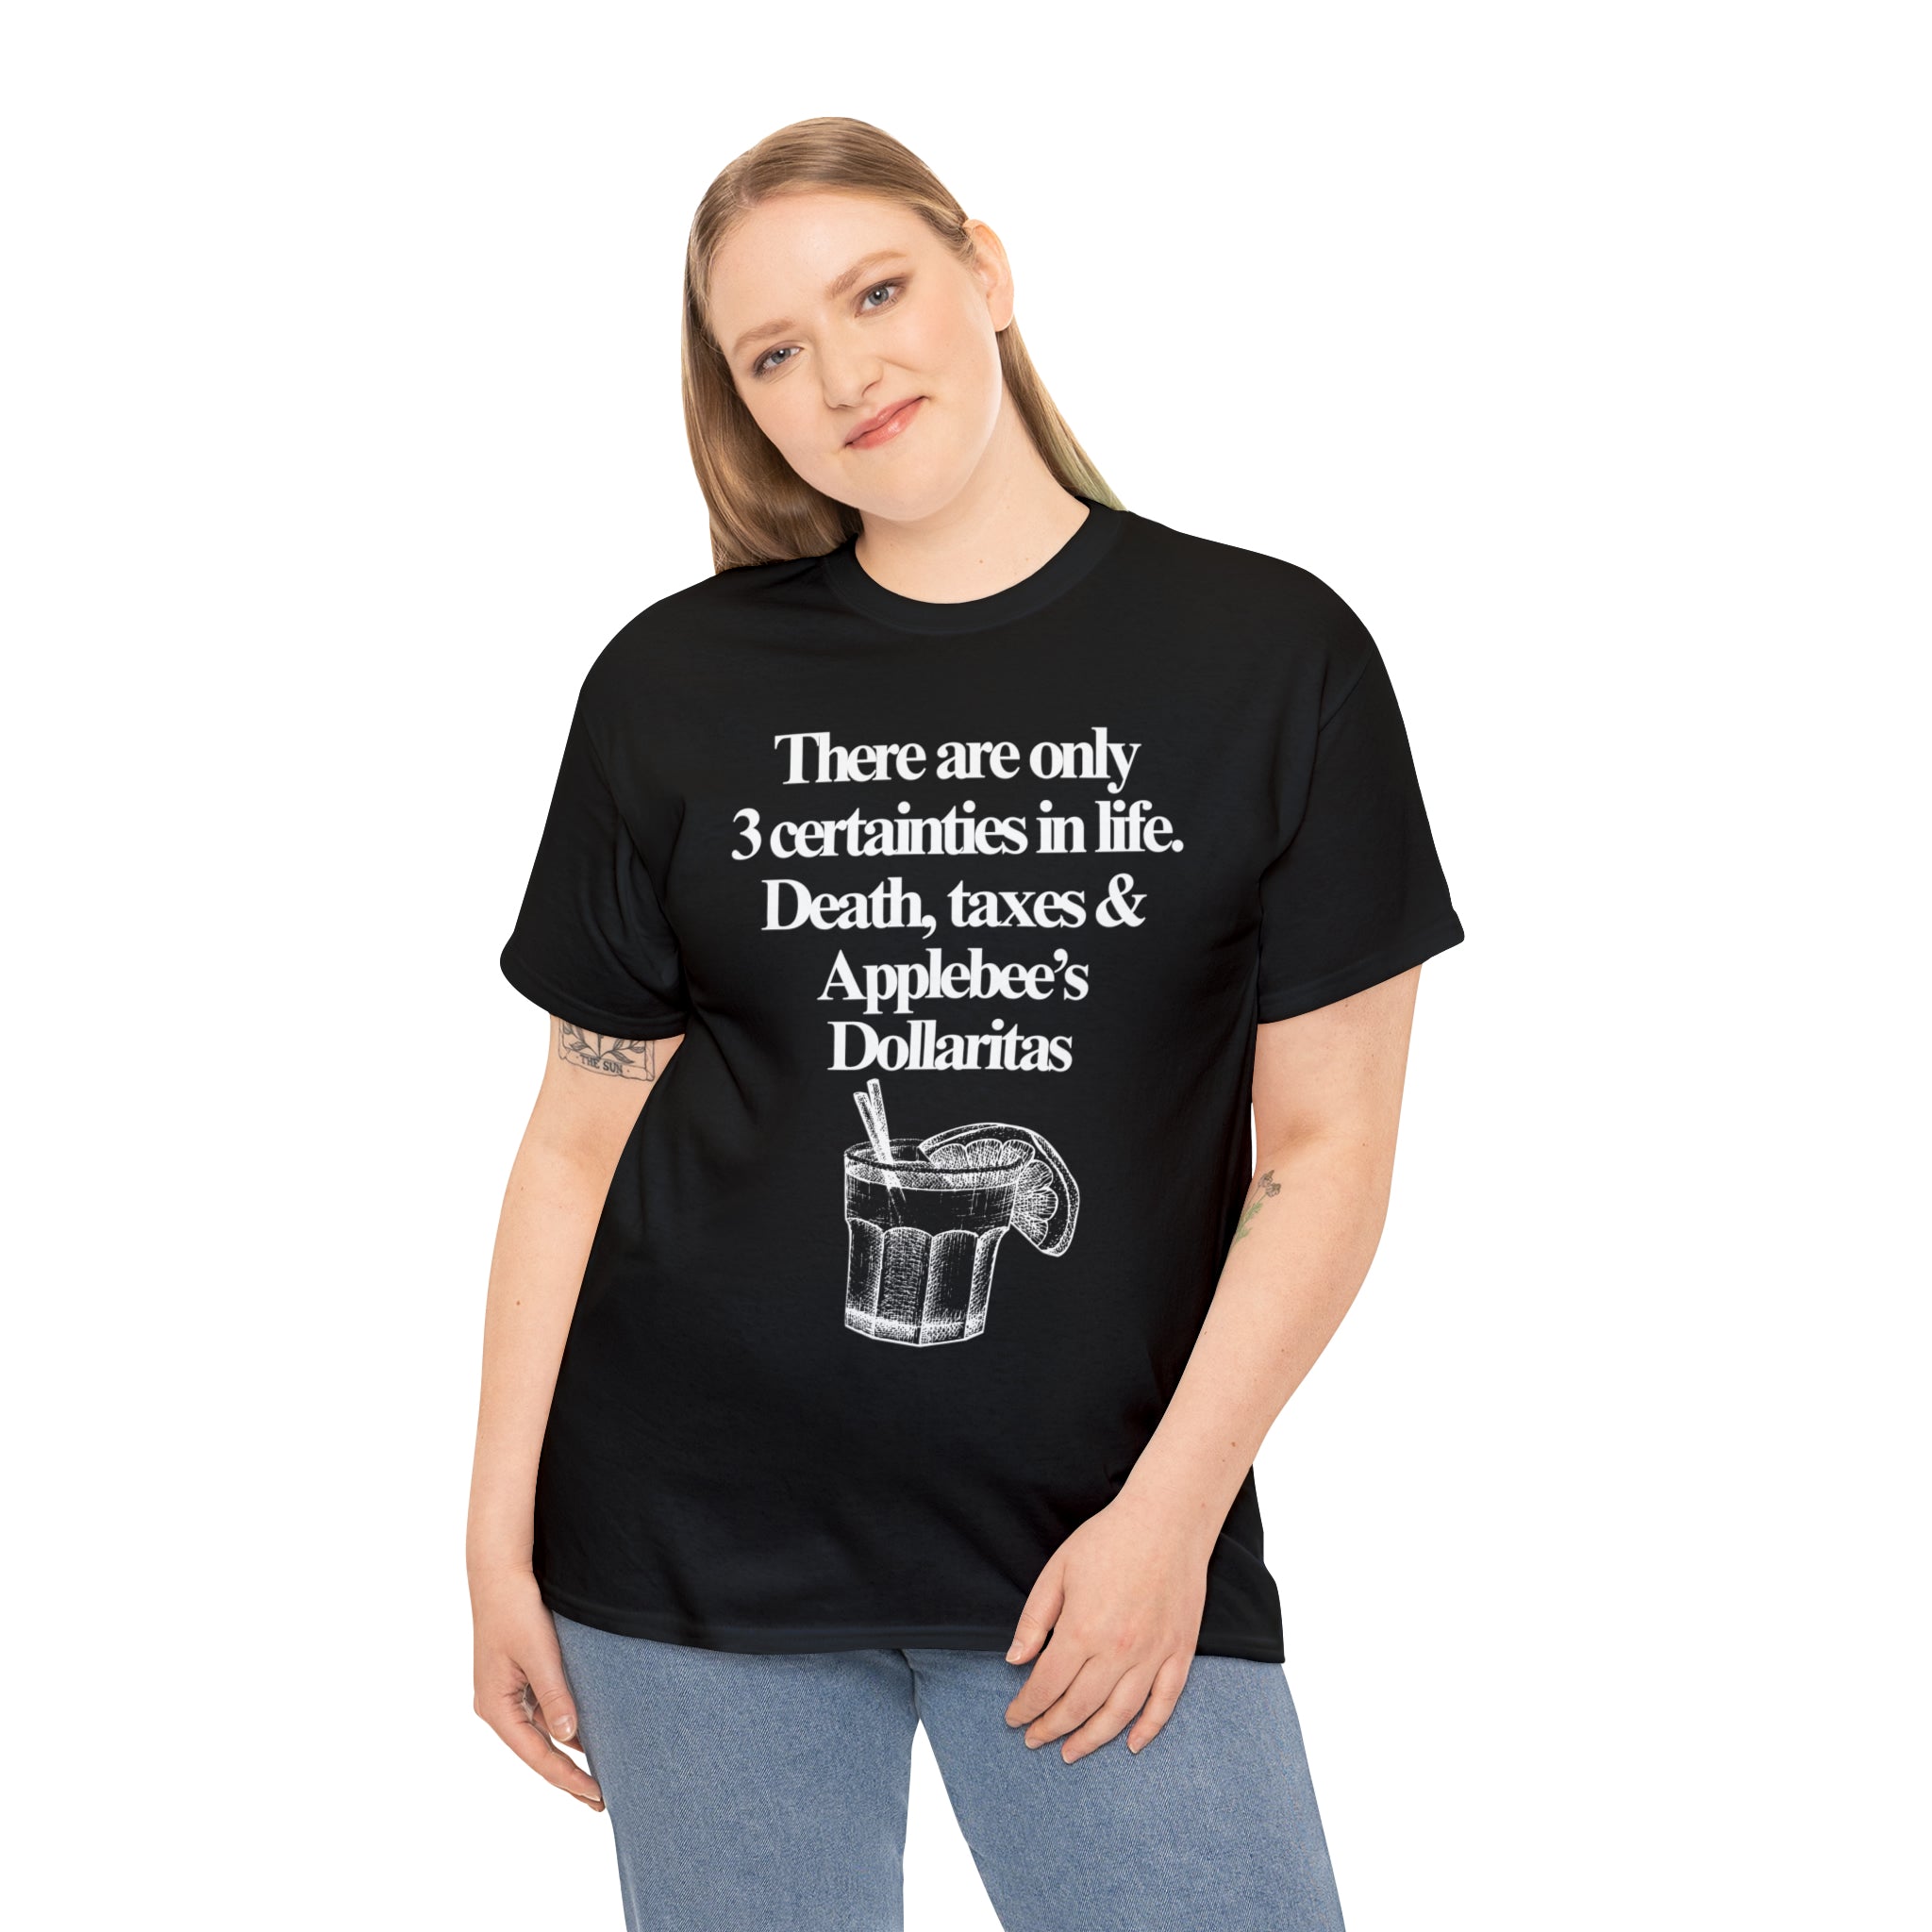 There are only 3 certainties in life. Death, taxes and Applebee's Dollaritas - Unisex Heavy Cotton Tee